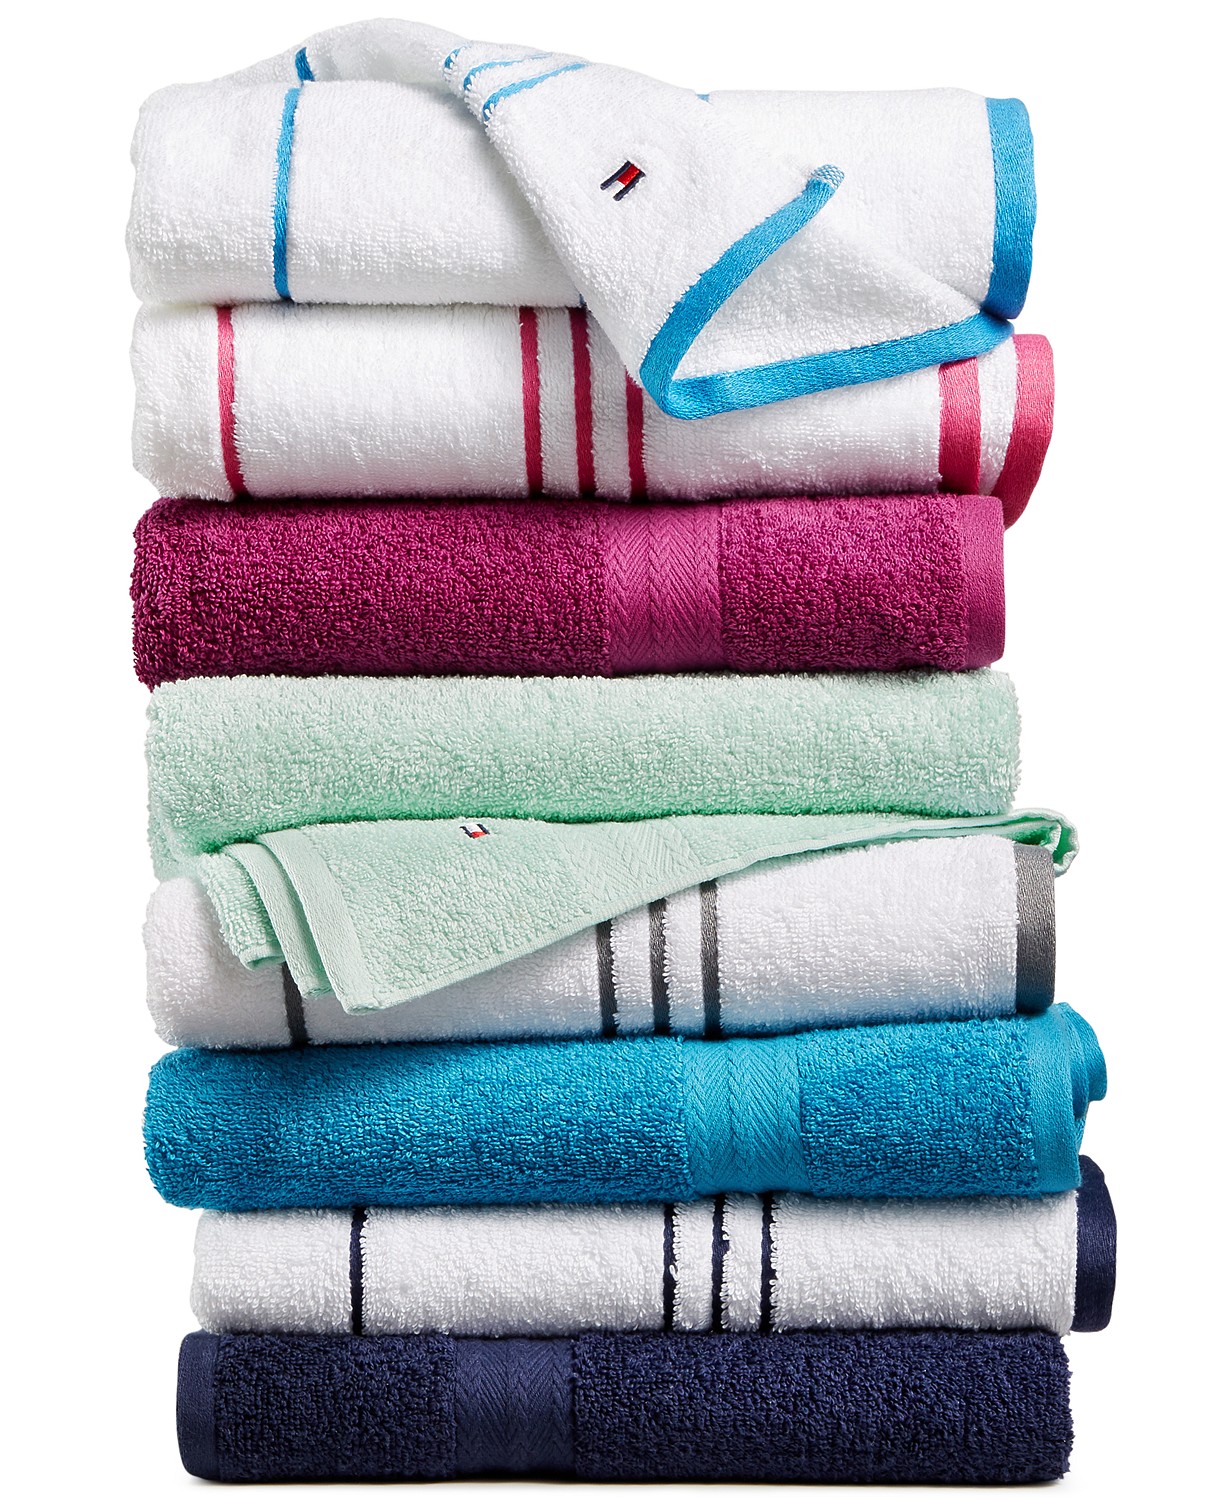 Vibrant towels by Tommy Hilfiger for Macy's